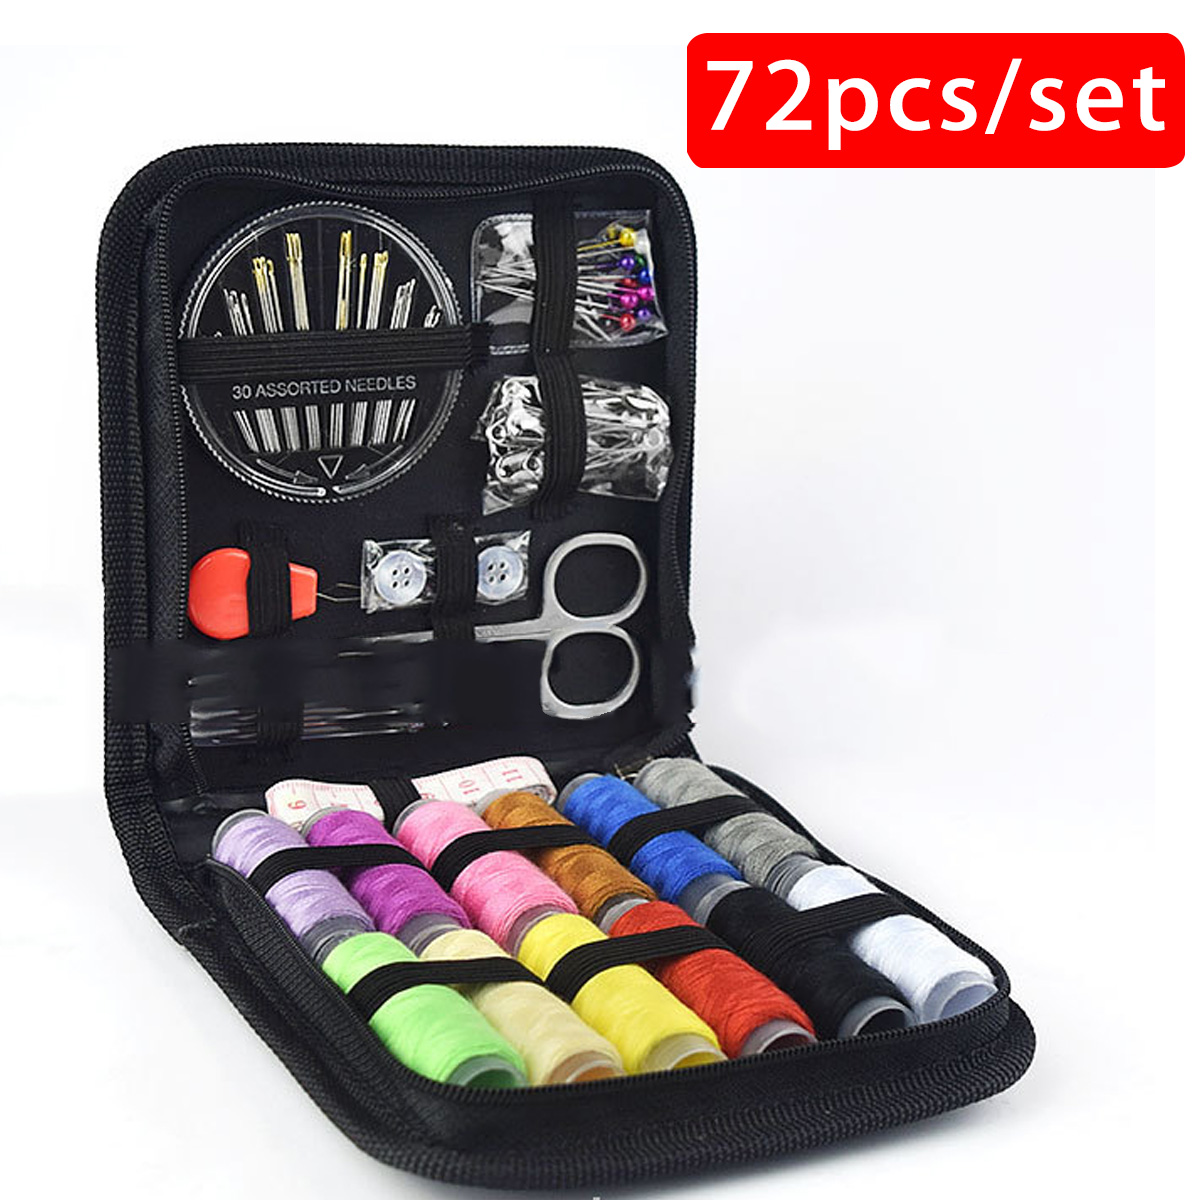 Portable-Travel-Small-Home-Sewing-Kit-Case-Needle-Thread-Scissor-1618823-6